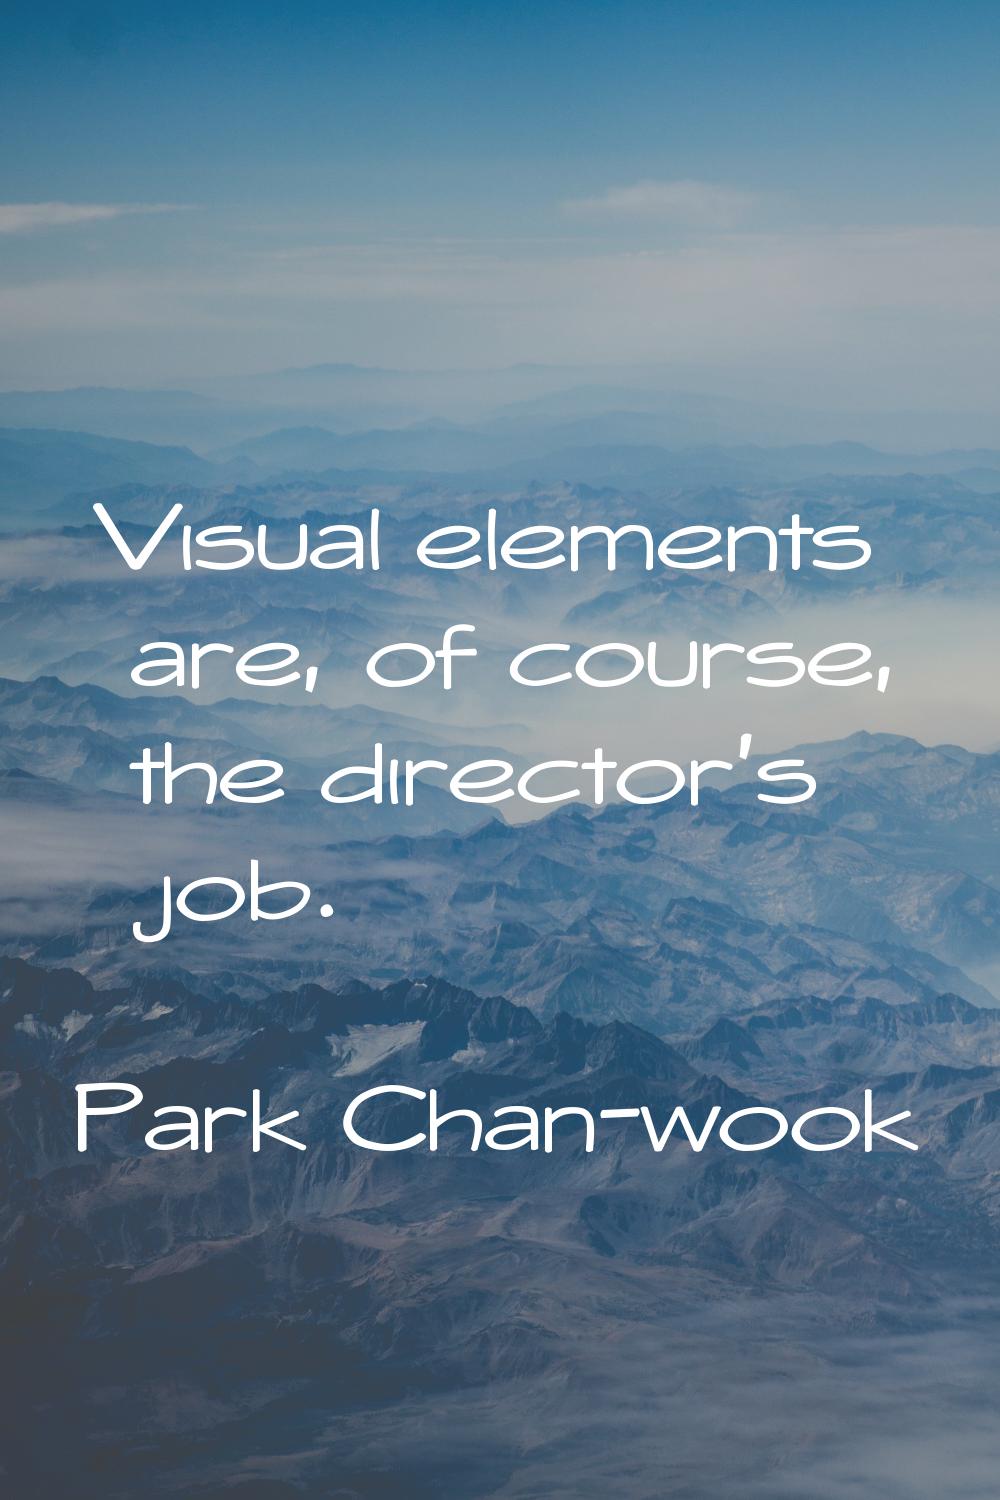 Visual elements are, of course, the director's job.